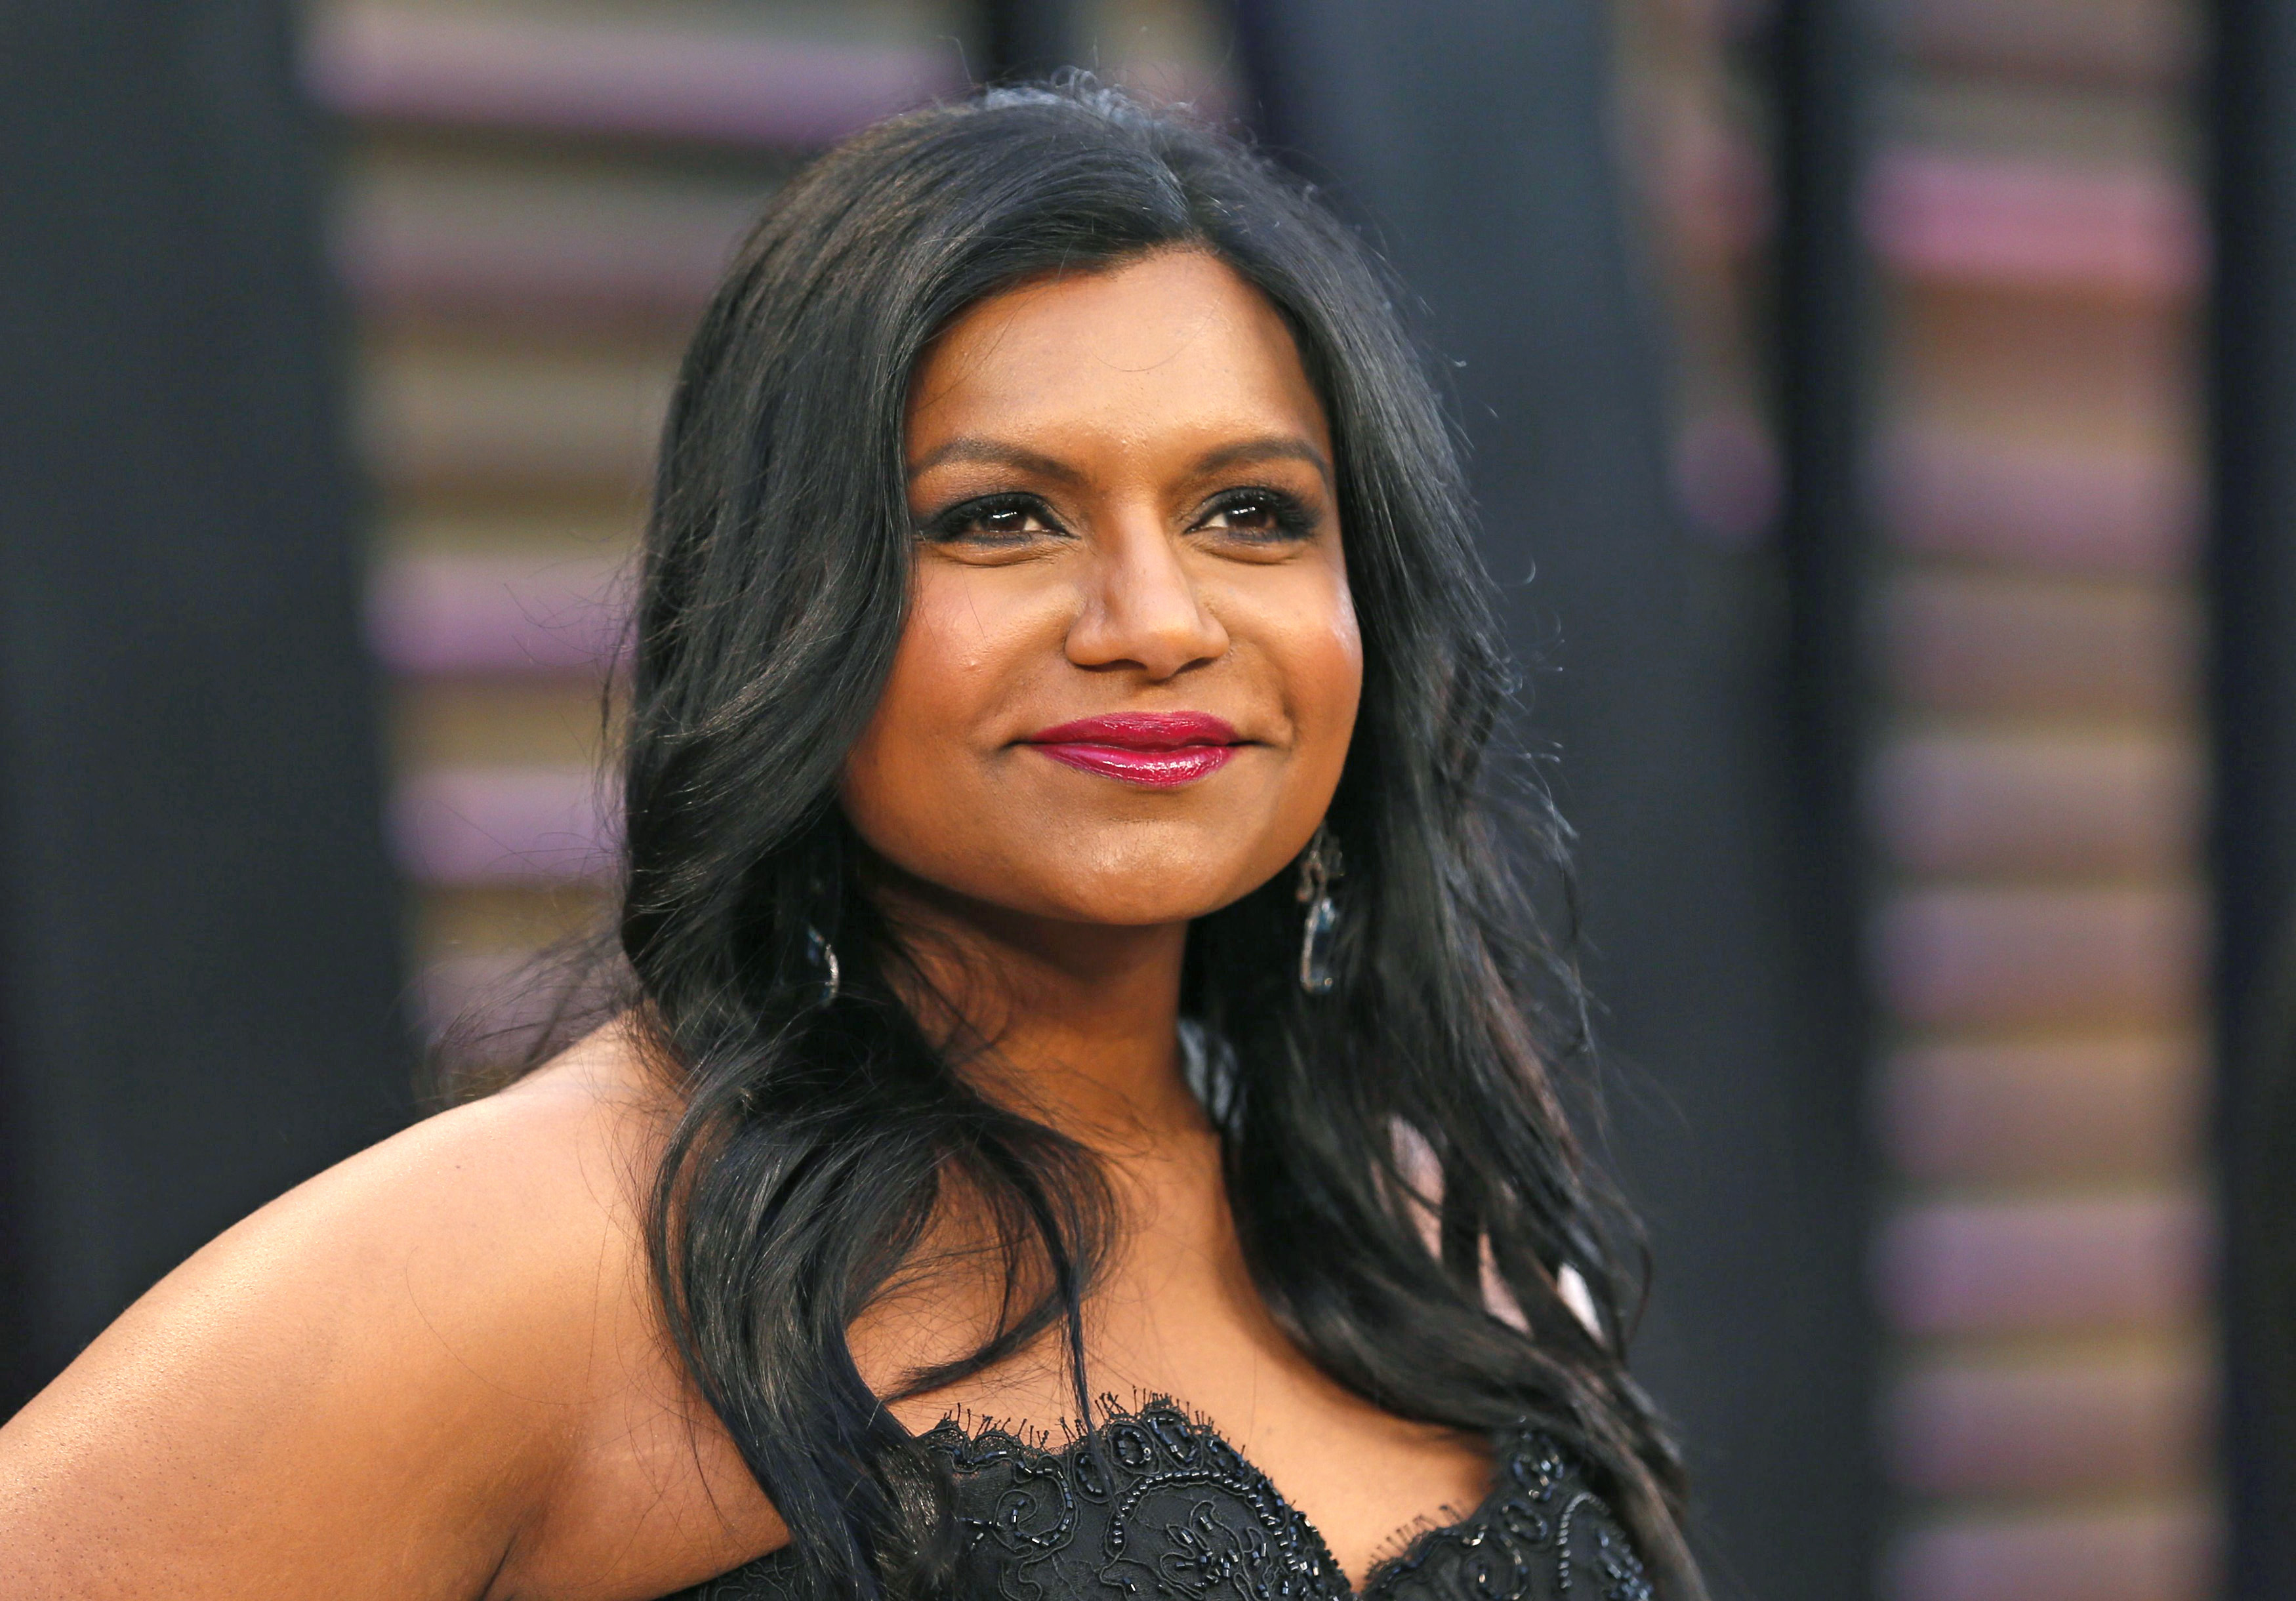 Mindy Kaling arrives at the 2014 Vanity Fair Oscars Party in West Hollywood, Calif., on March 2, 2014. (Danny Moloshok—Reuters)